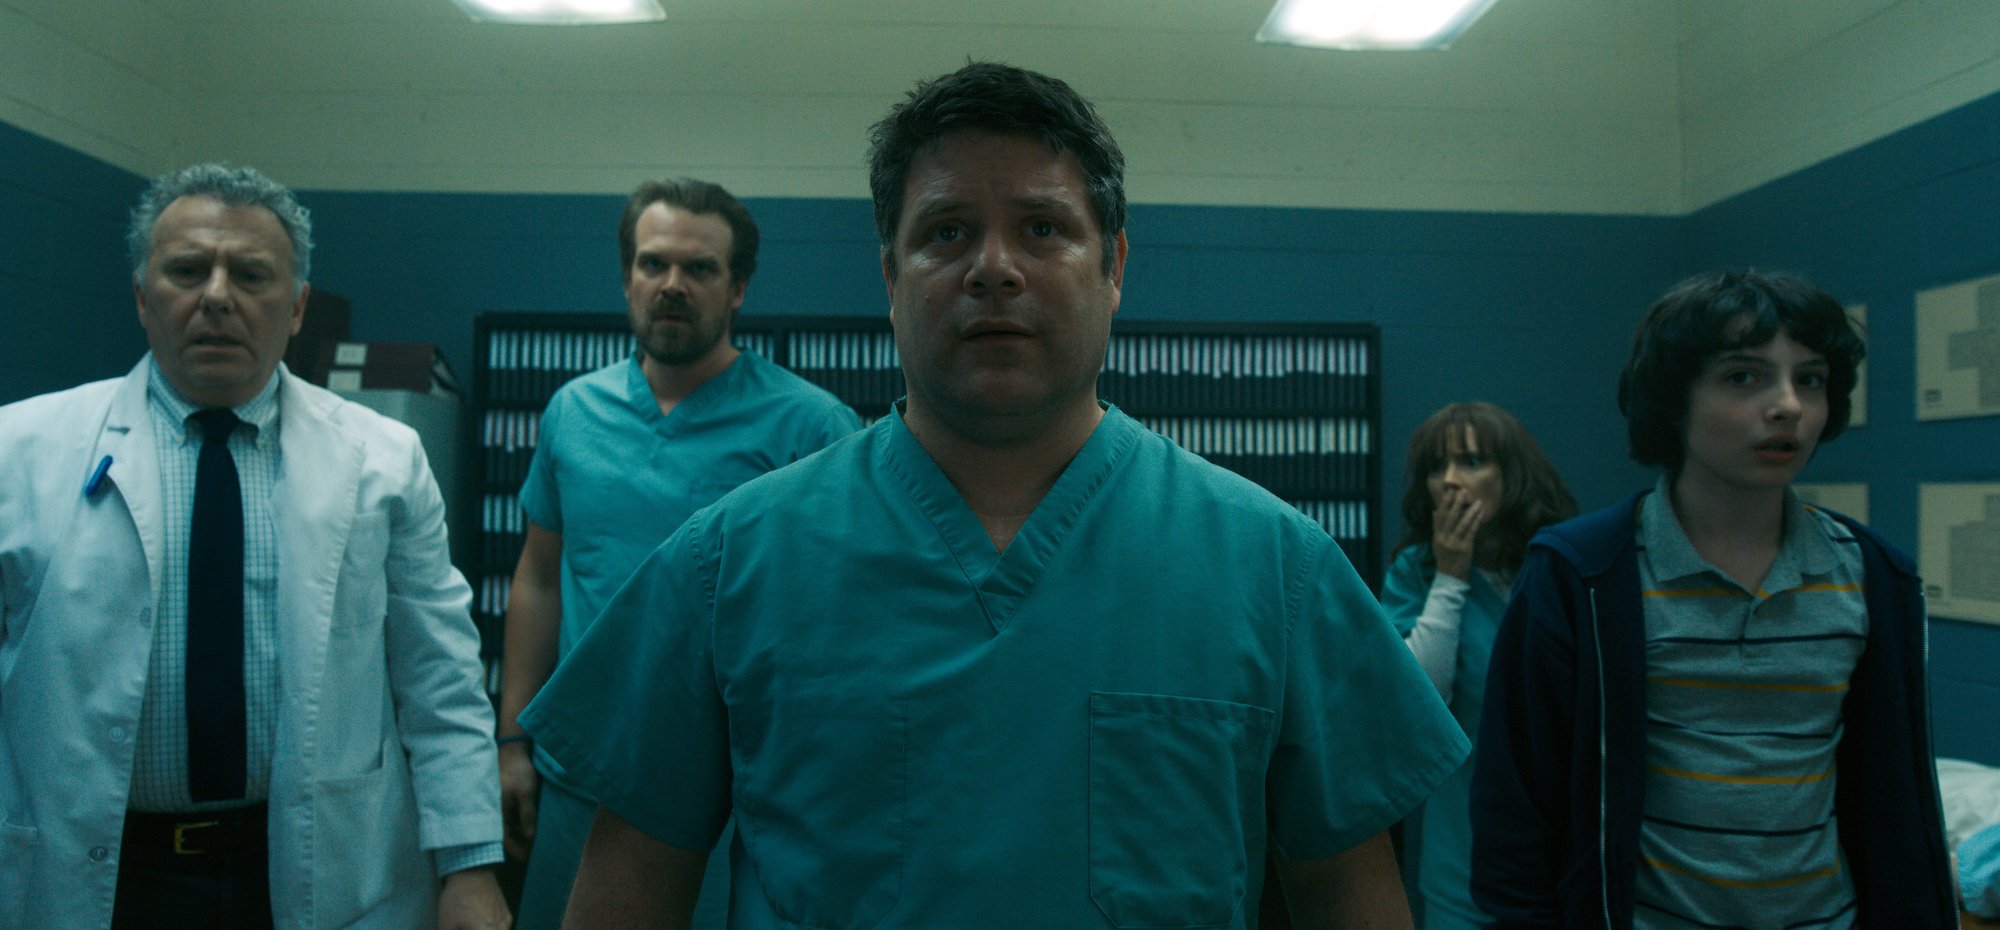 'Stranger Things' Season 2 production still with Bob Newby, played by Sean Astin, standing in scrubs in Hawkins National Laboratory